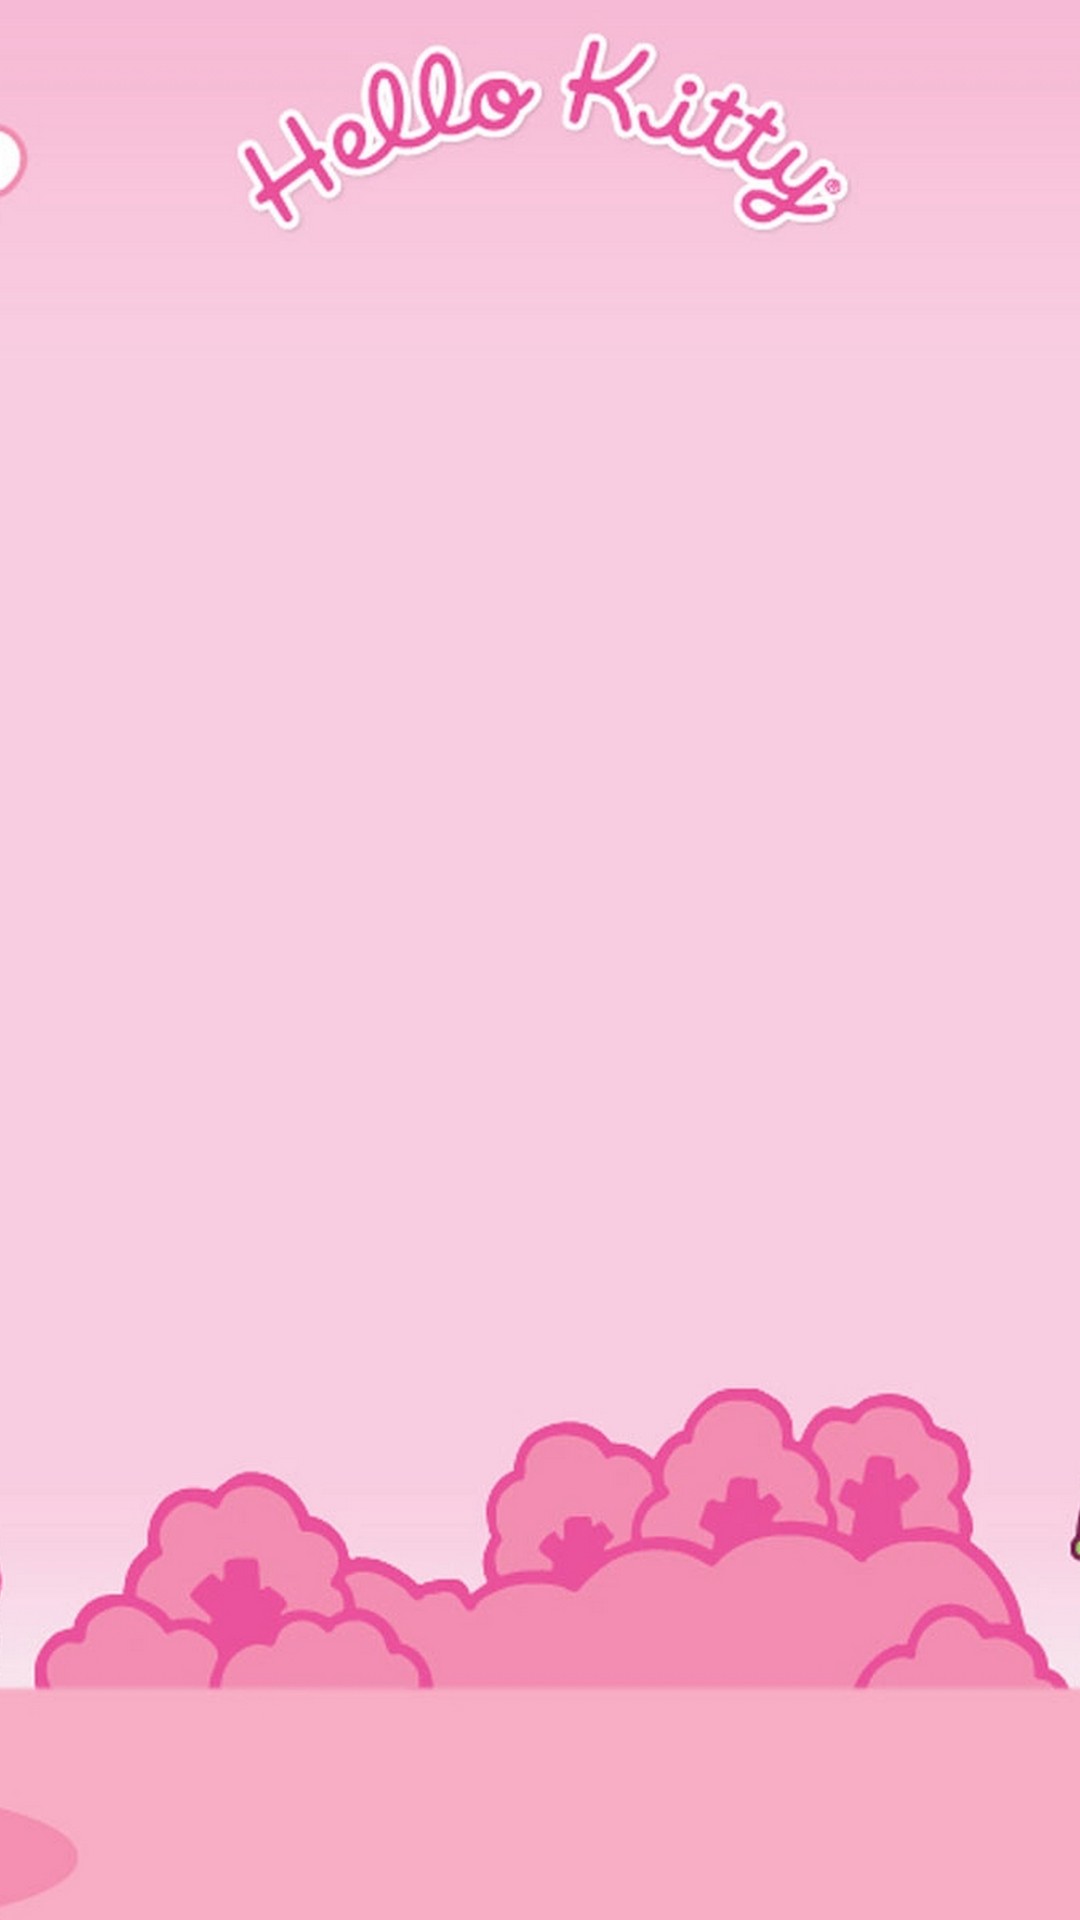 Wallpaper Android Hello Kitty Pictures with resolution 1080X1920 pixel. You can make this wallpaper for your Android backgrounds, Tablet, Smartphones Screensavers and Mobile Phone Lock Screen